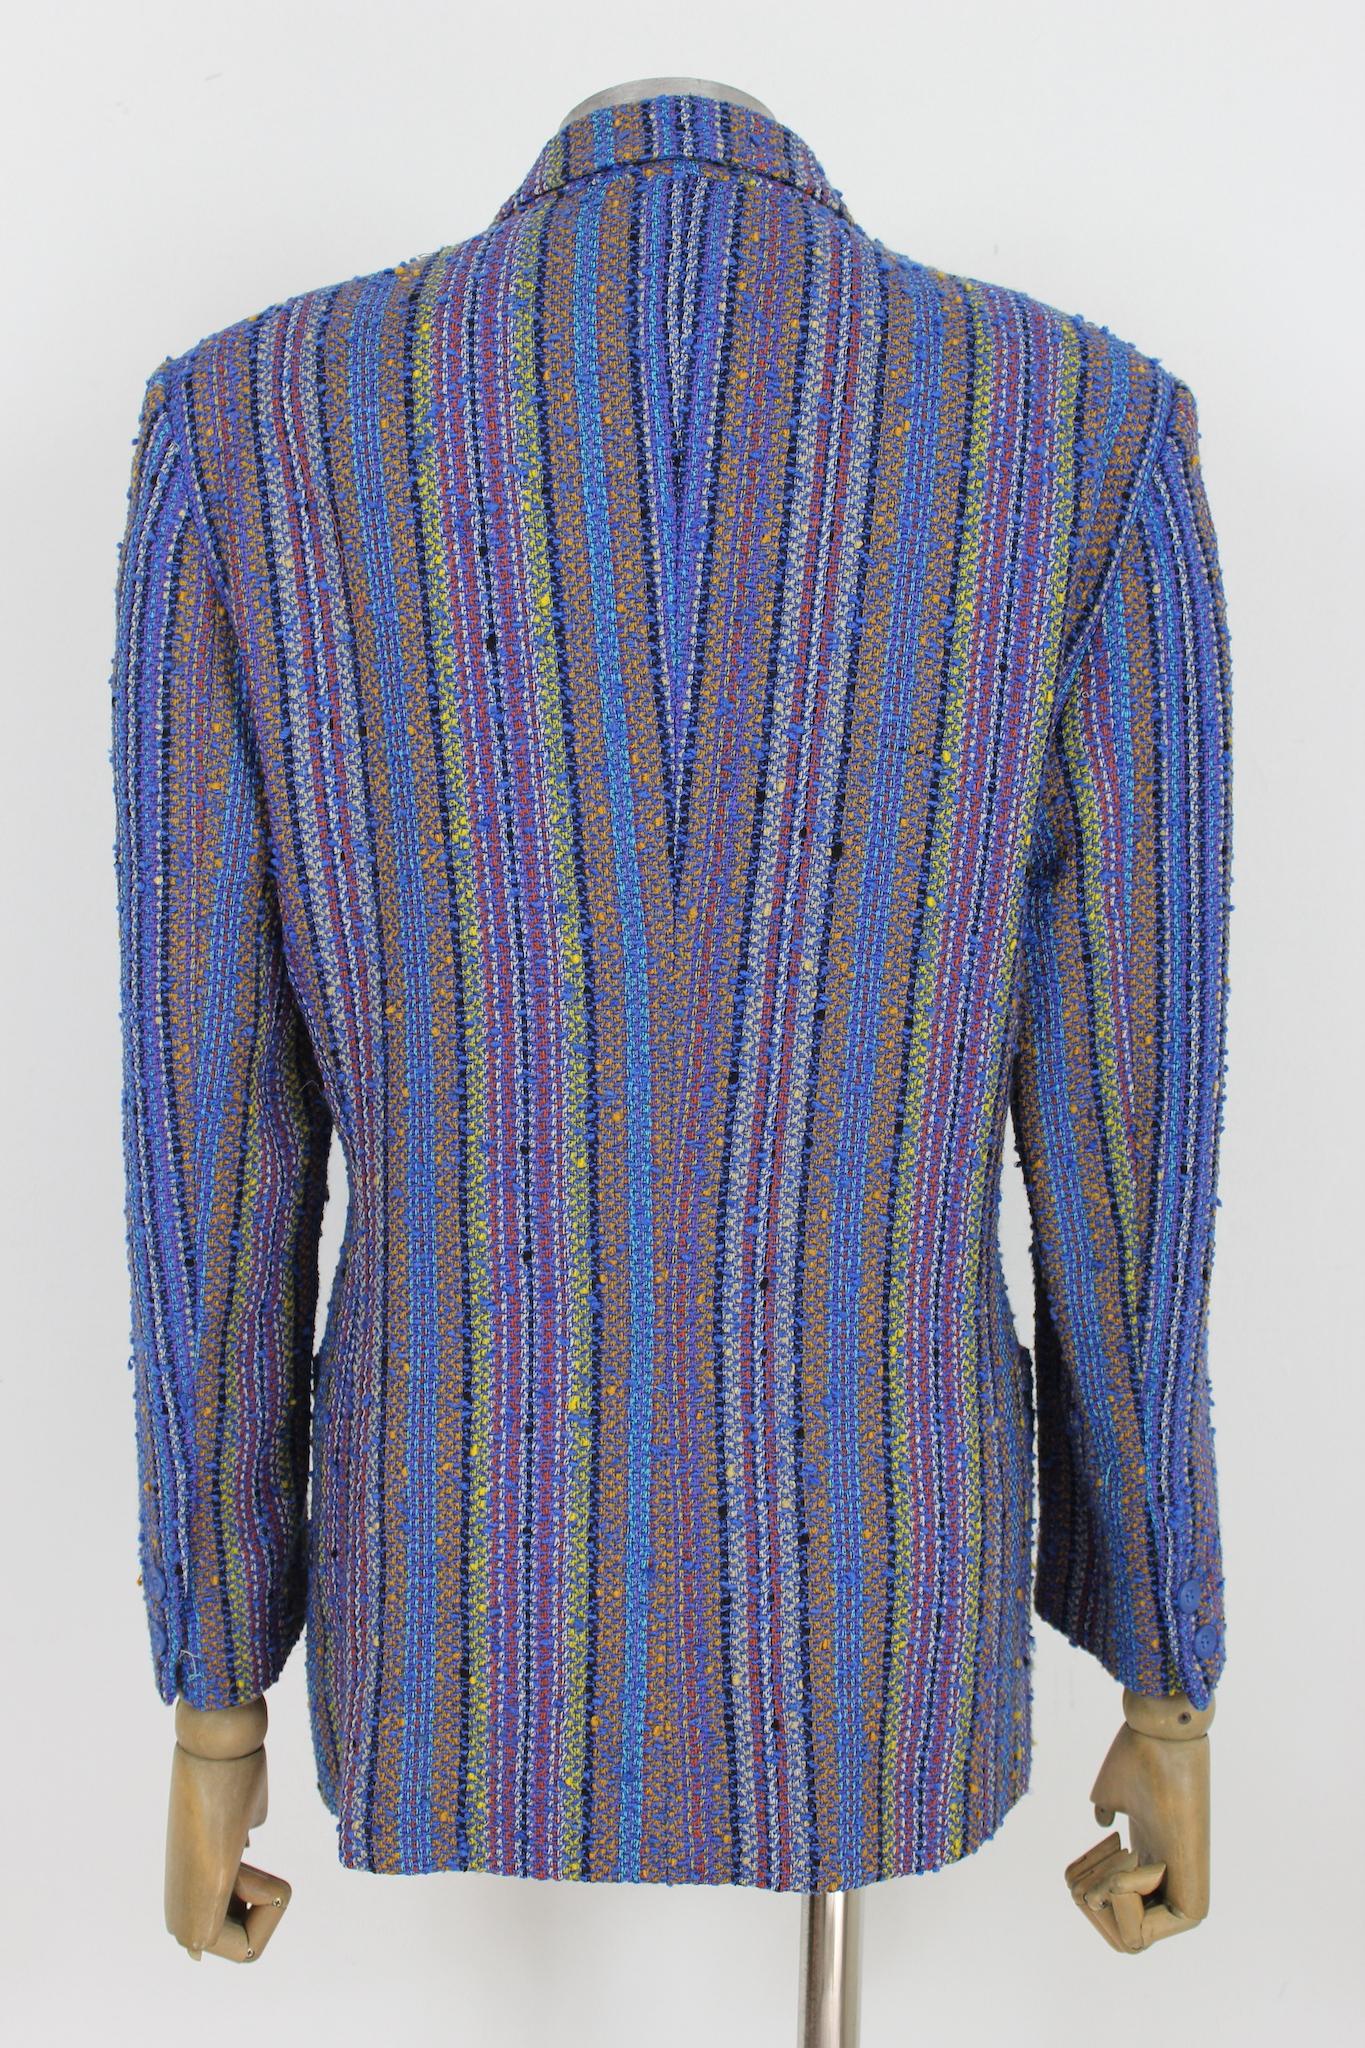 Missoni vintage 90s boucle wool jacket. Classic blue, yellow and red blazer with striped pattern. Internal shoulder straps and one button closure. Fabric 97% wool, 3% polyamide. Made in Italy.

Size: 42 It 8 Us 10 Uk

Shoulder: 46 cm
Bust / Chest: